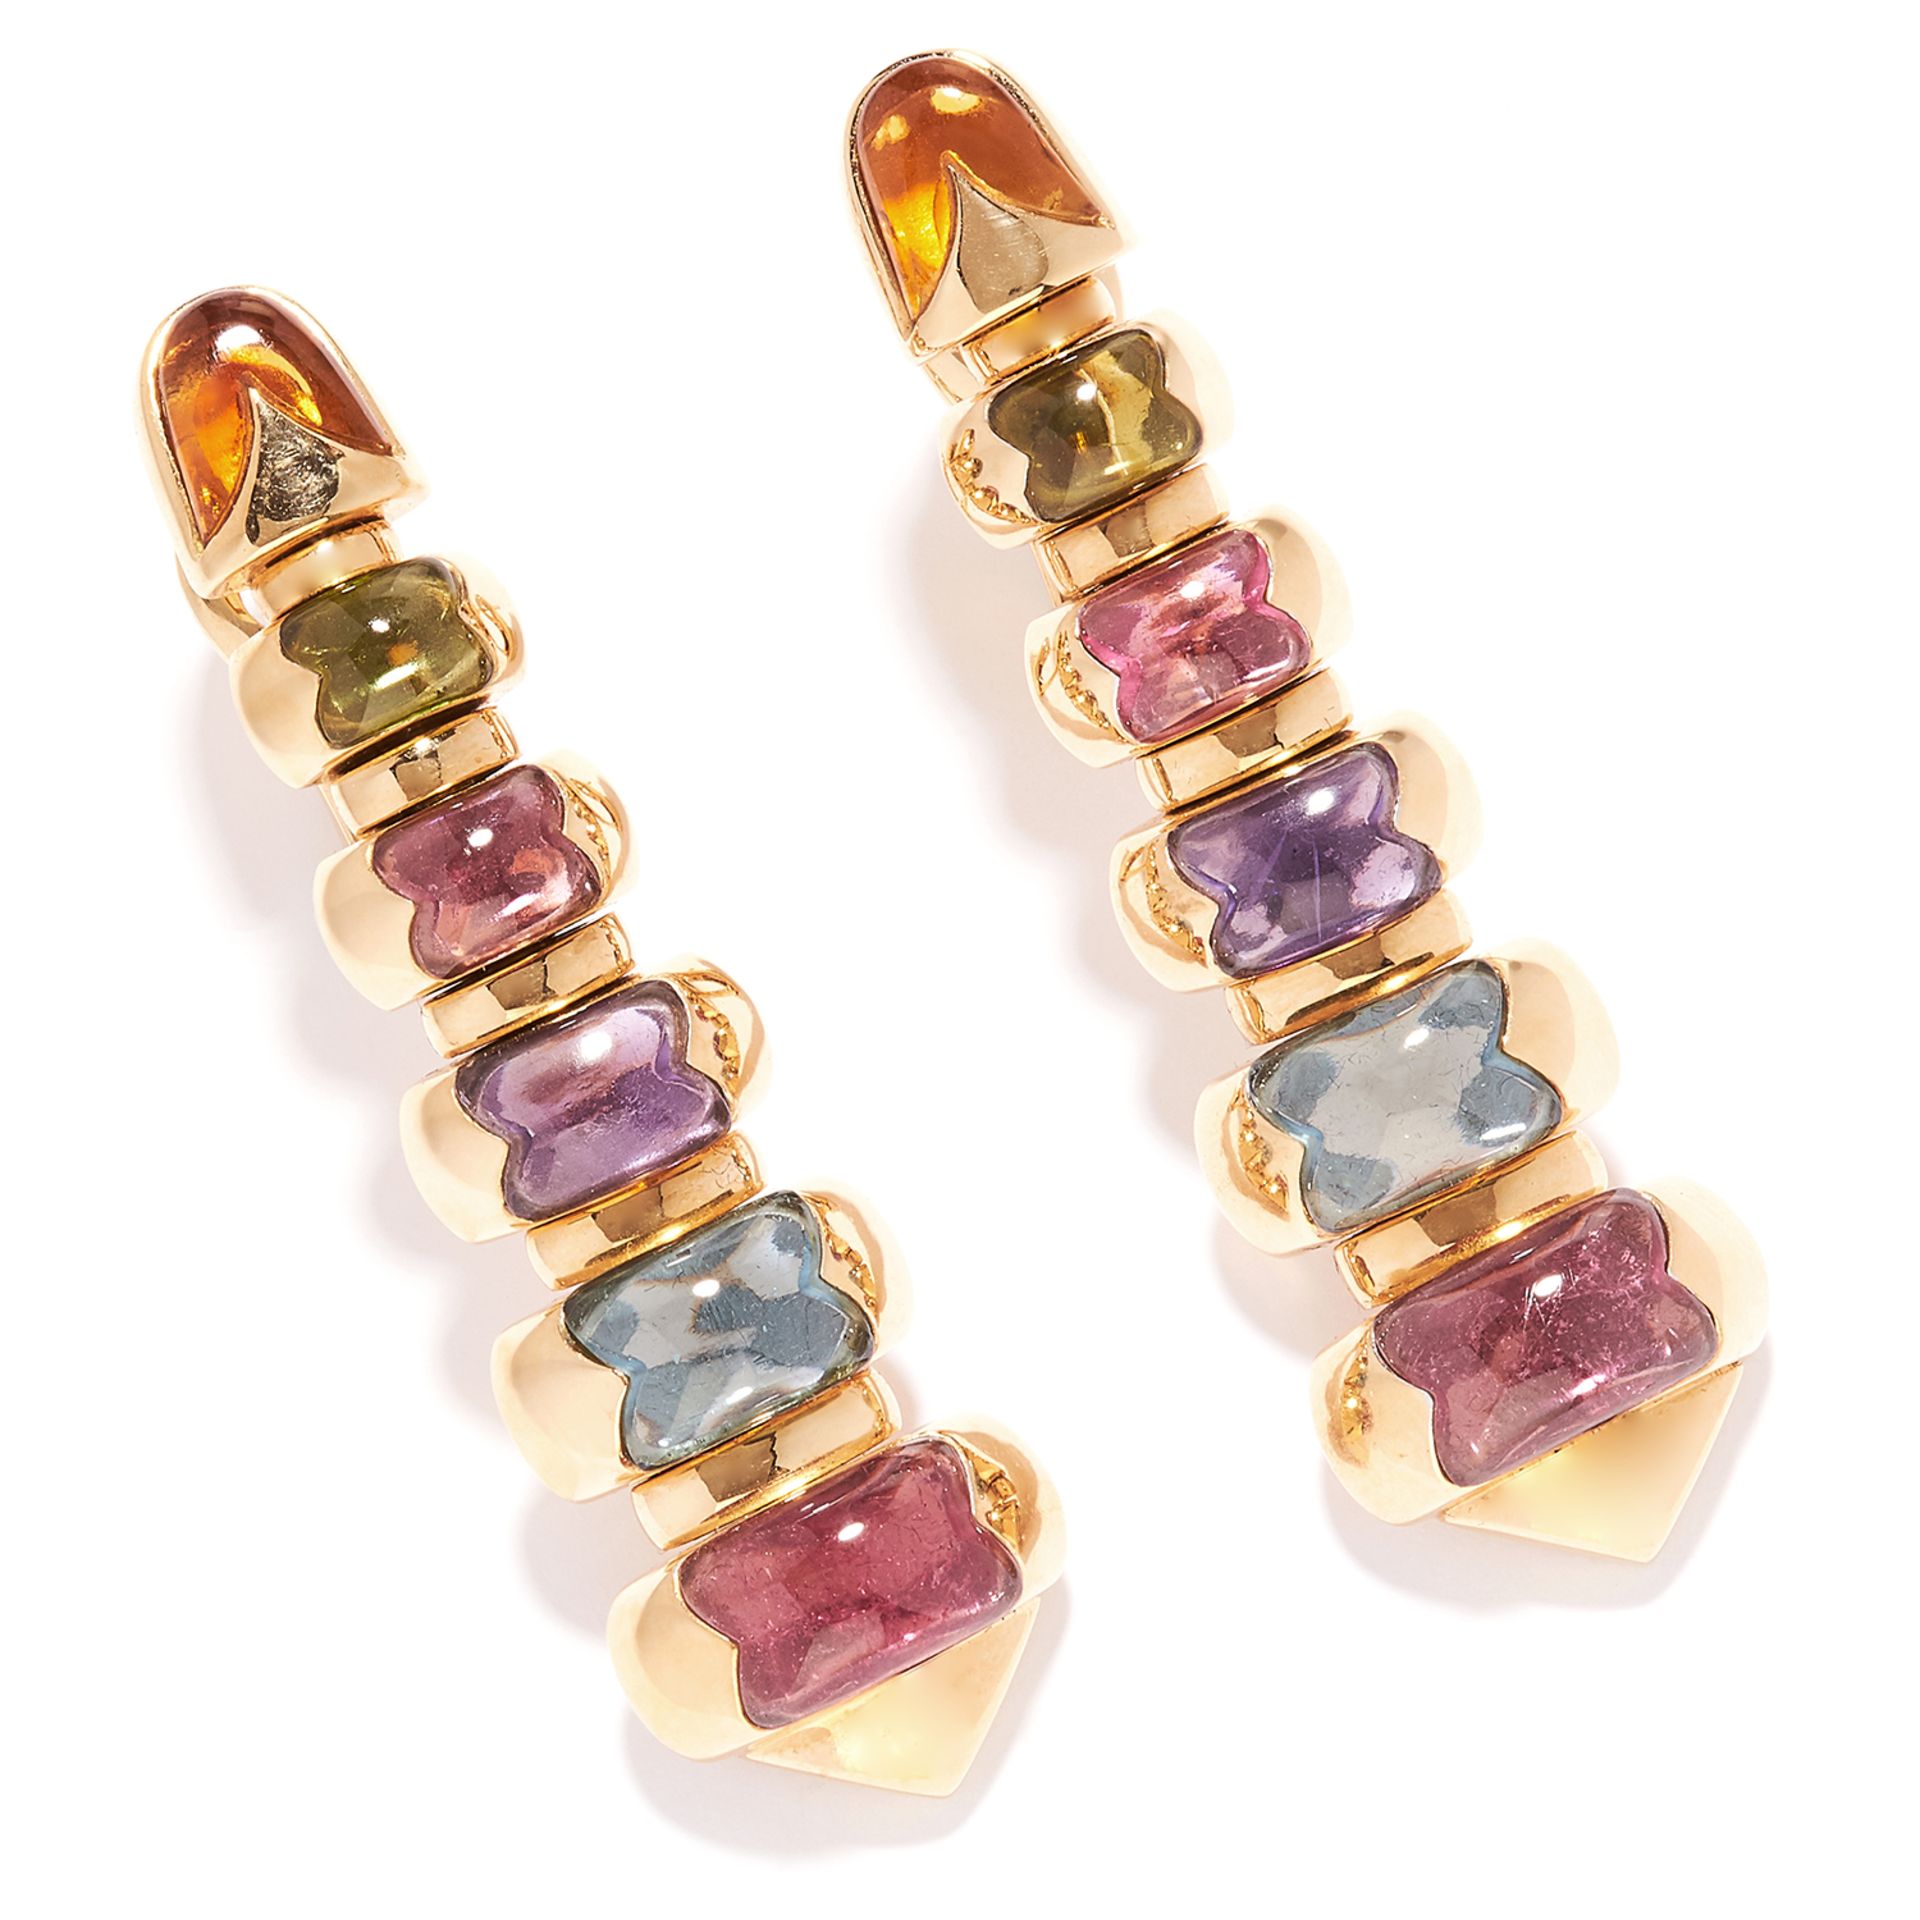 JEWELLED DROP EARRINGS, BULGARI in 18ct yellow gold, the tapering bodies jewelled with various